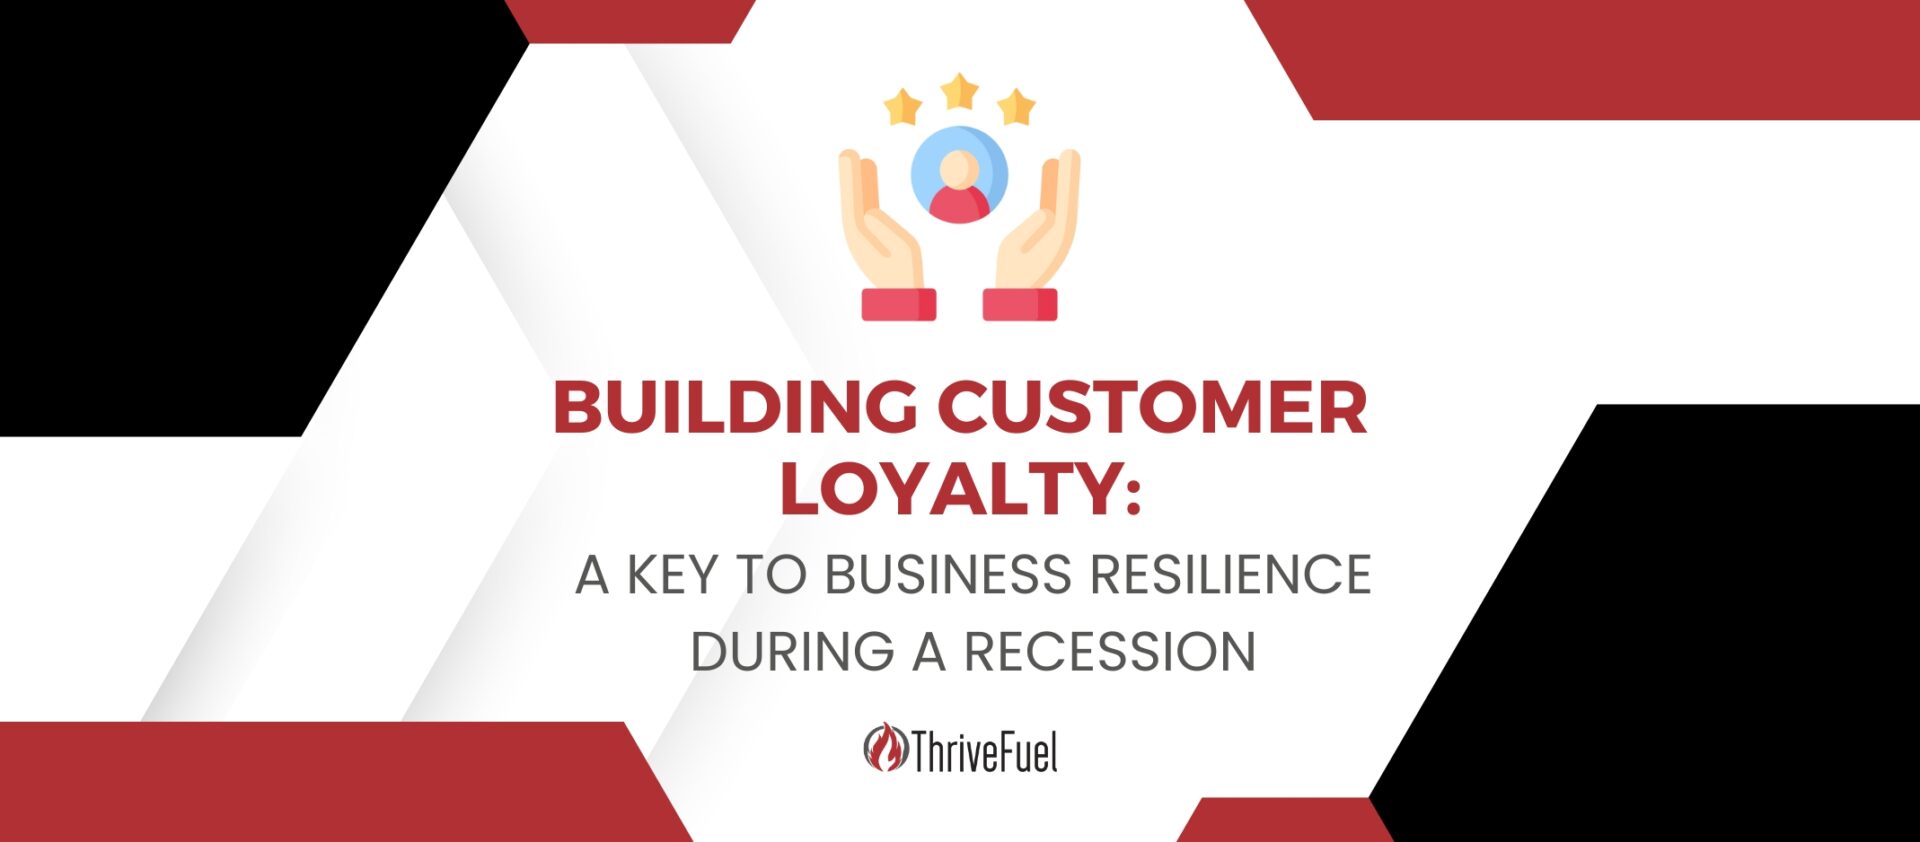 Building Customer Loyalty: A Key to Business Resilience During a Recession